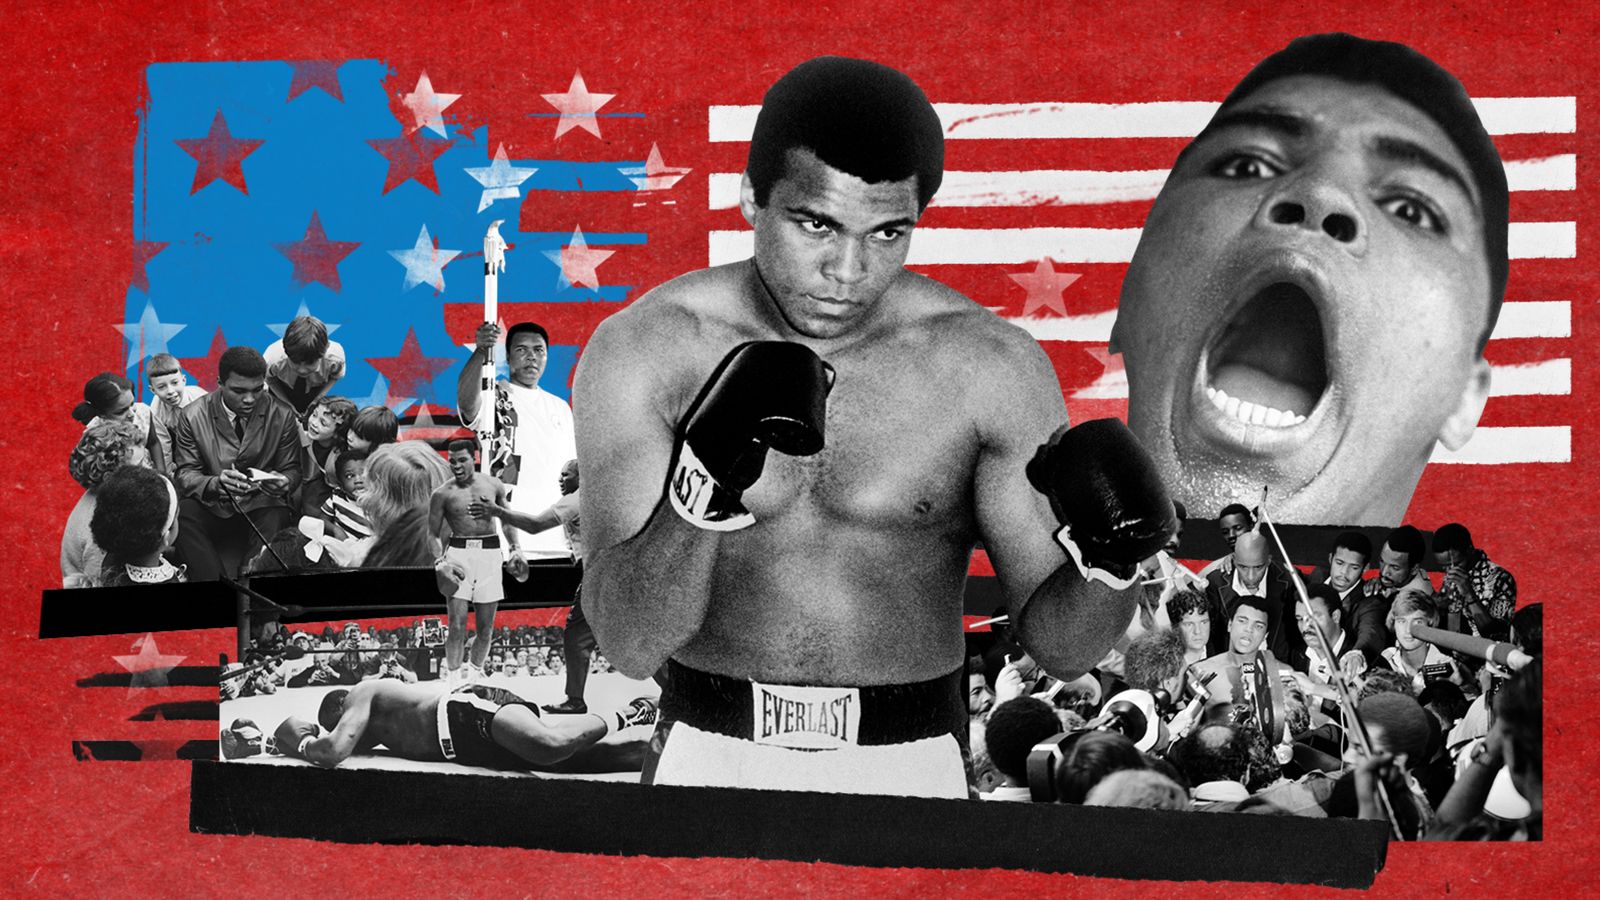 Muhammad Ali: New documentary shows how legend stayed true to himself in 'hero' journey | CNN